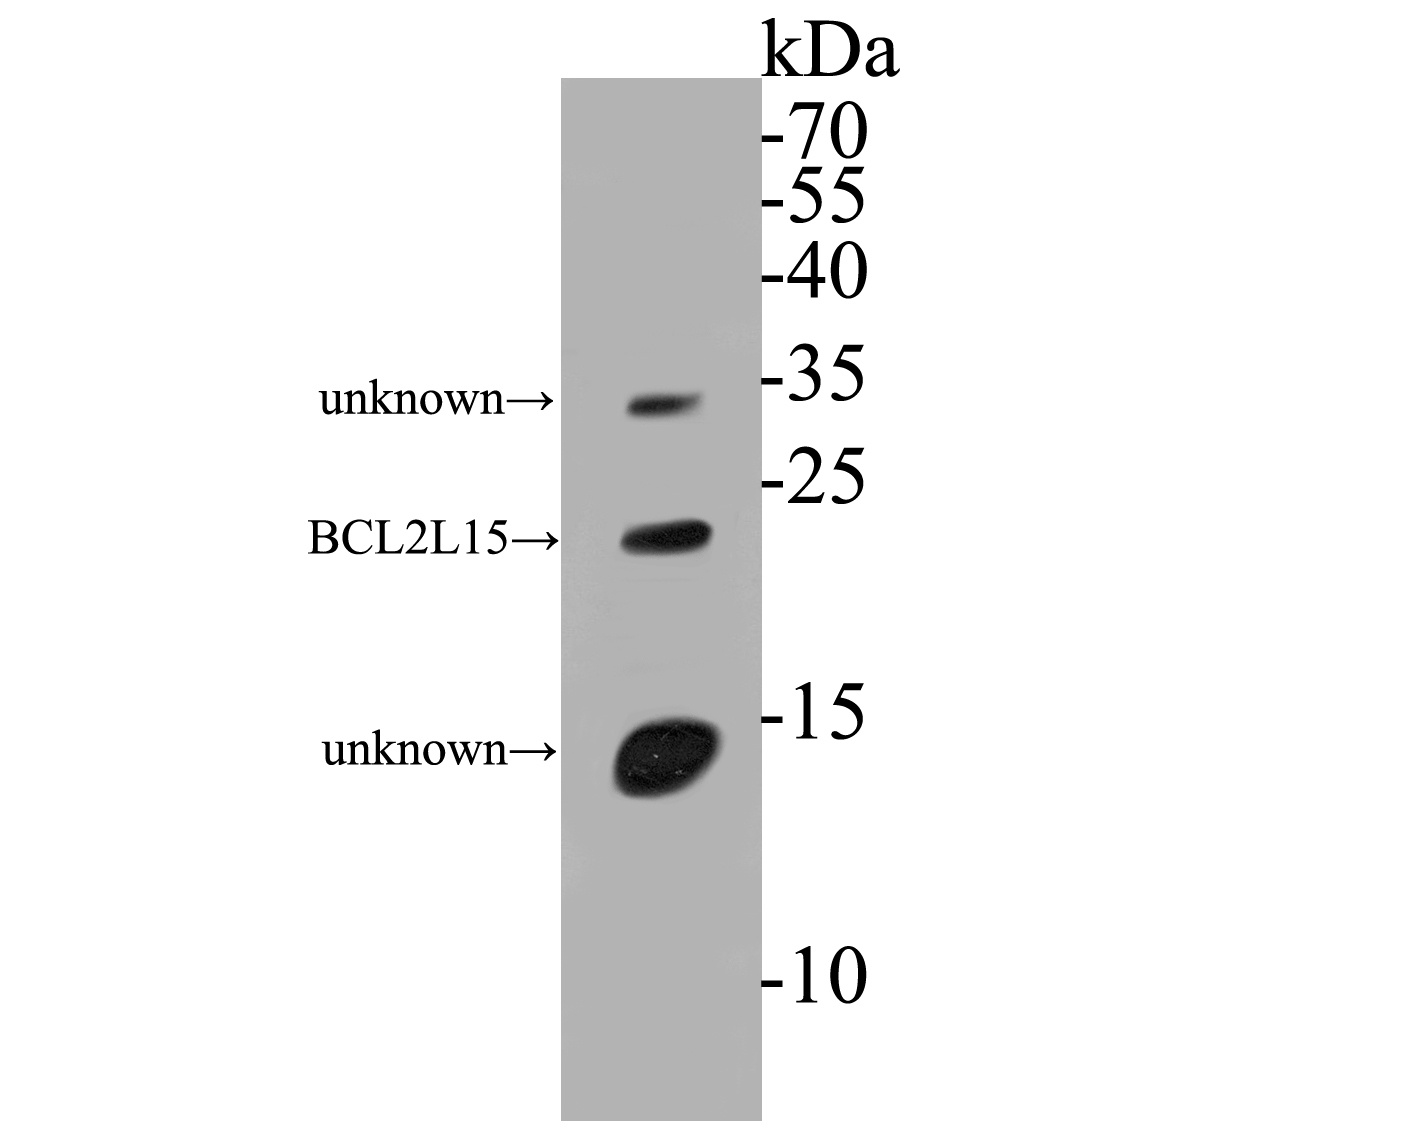 Western blot analysis of BCL2L15 on human small intestine tissue lysates. Proteins were transferred to a PVDF membrane and blocked with 5% BSA in PBS for 1 hour at room temperature. The primary antibody (ER1901-44, 1/500) was used in 5% BSA at room temperature for 2 hours. Goat Anti-Rabbit IgG - HRP Secondary Antibody (HA1001) at 1:5,000 dilution was used for 1 hour at room temperature.